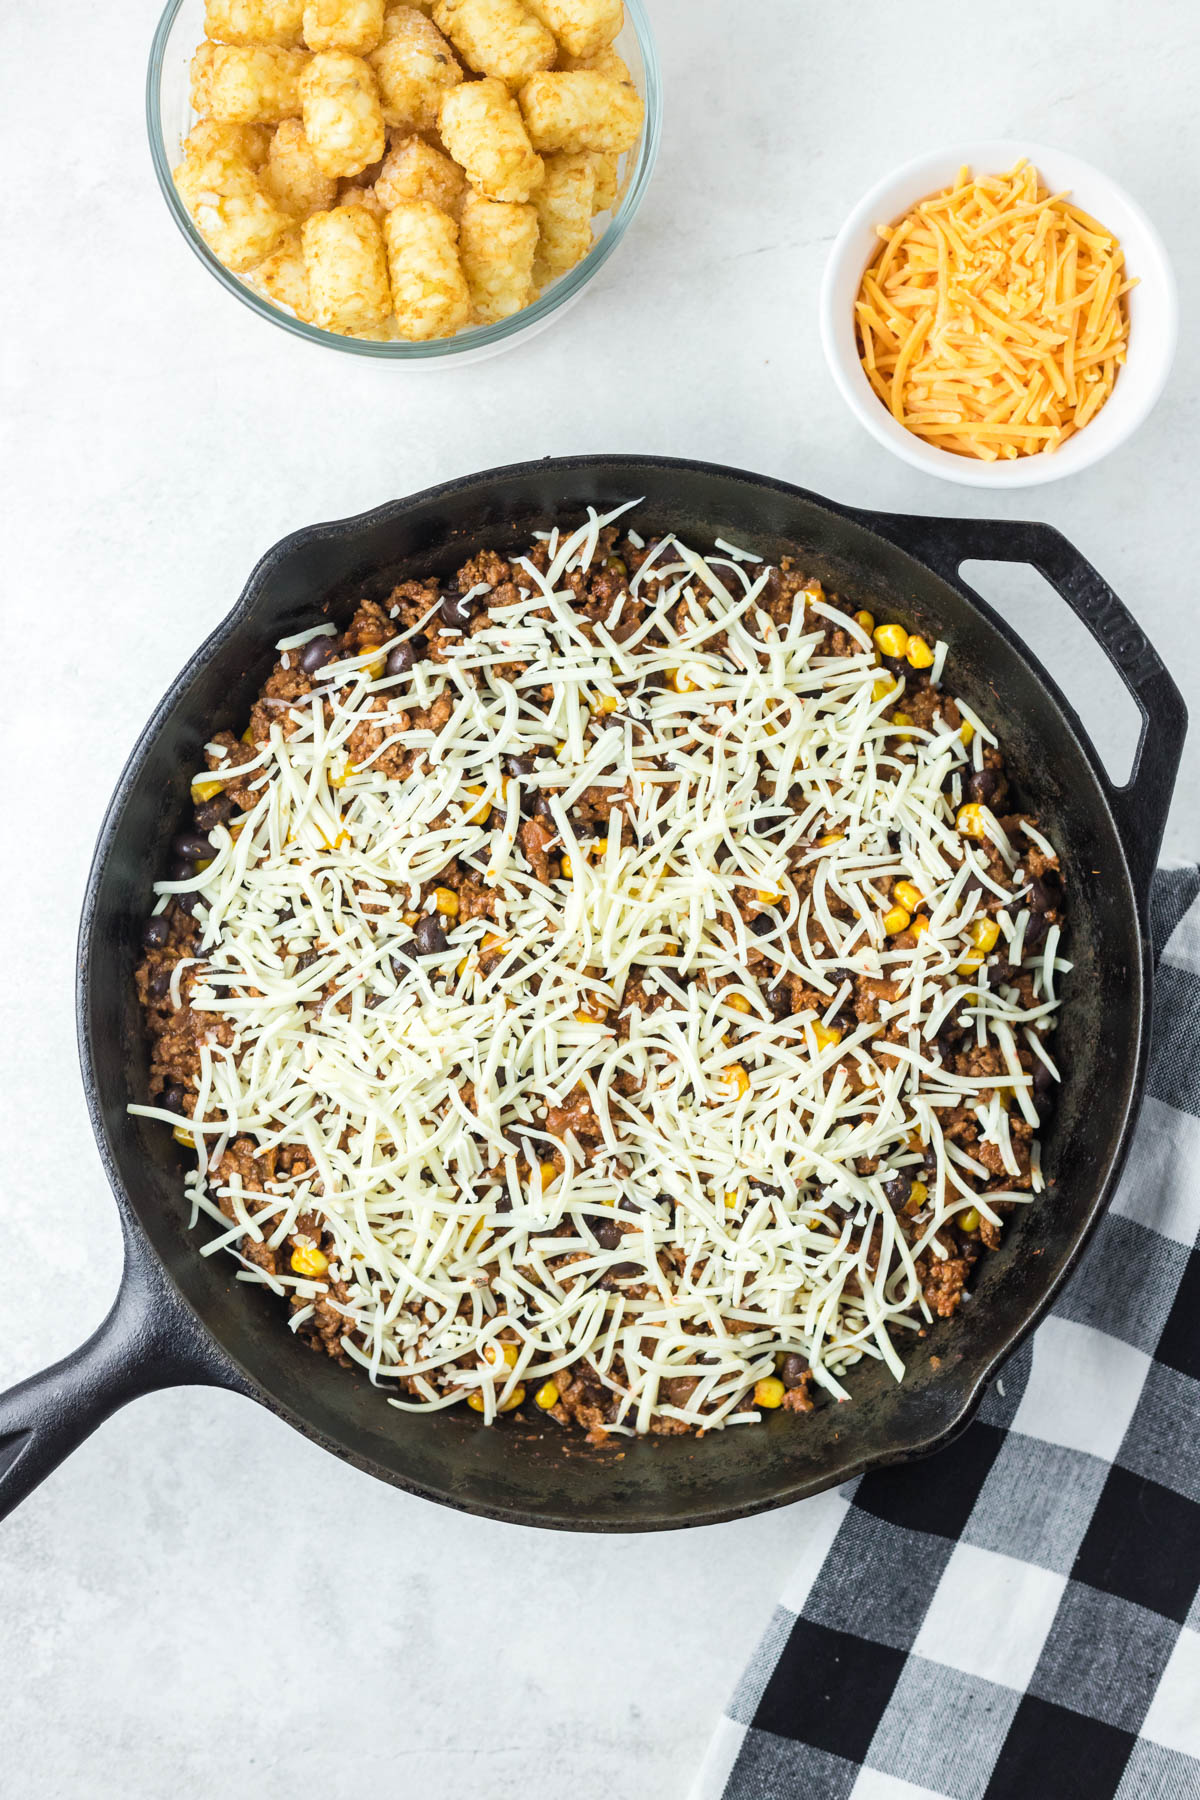 A ground beef mixture is topped with shredded cheese, in a skillet.